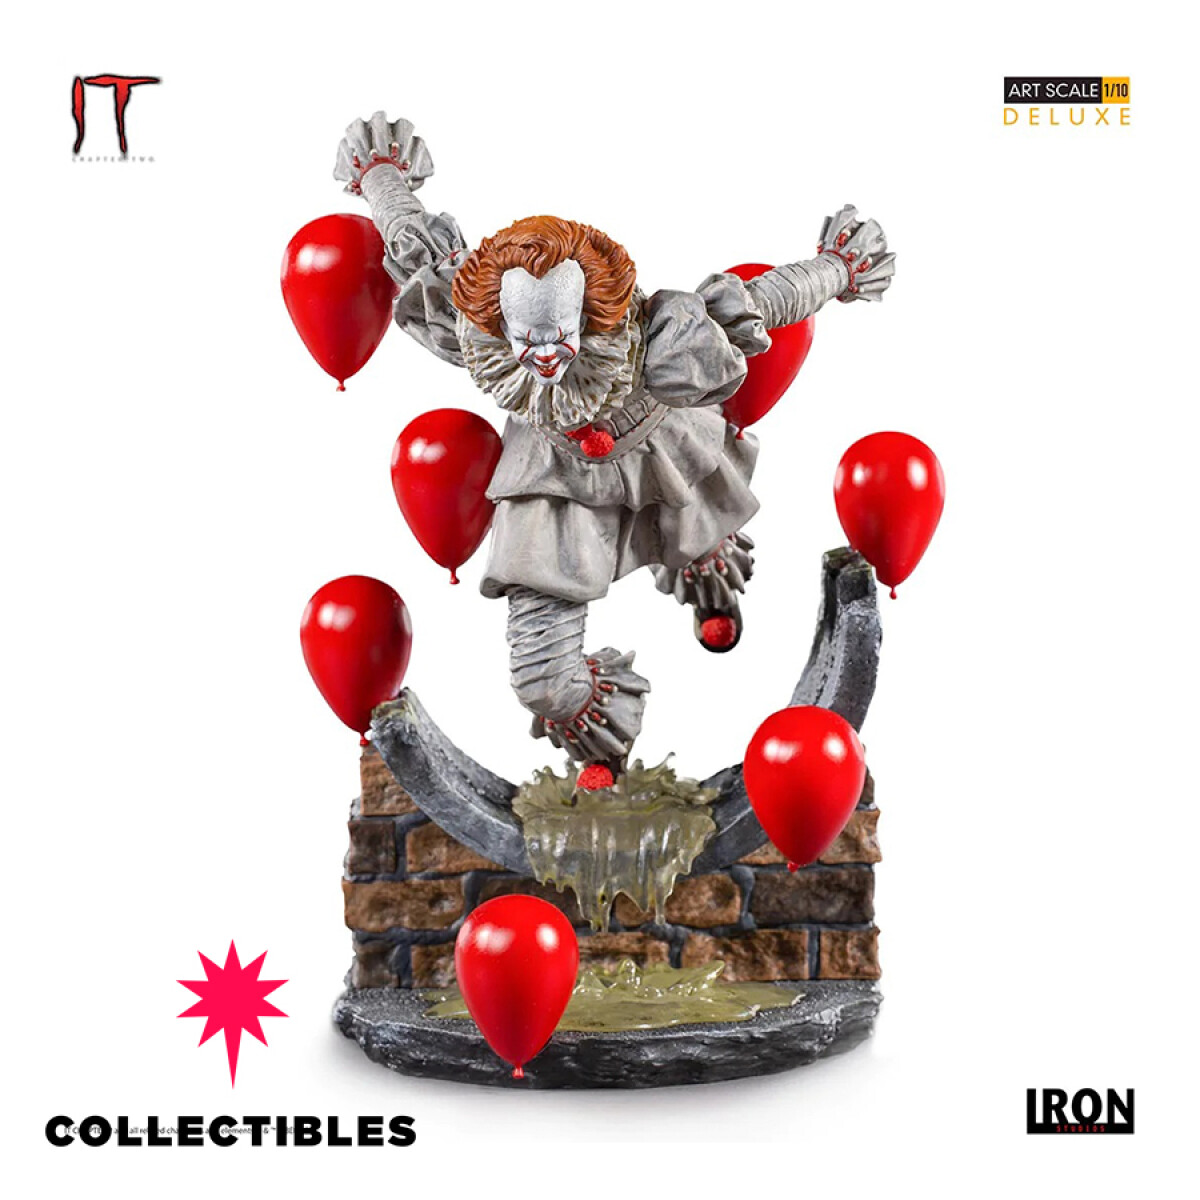 PENNYWISE DELUXE ART SCALE 1/10 - IT CHAPTER TWO 